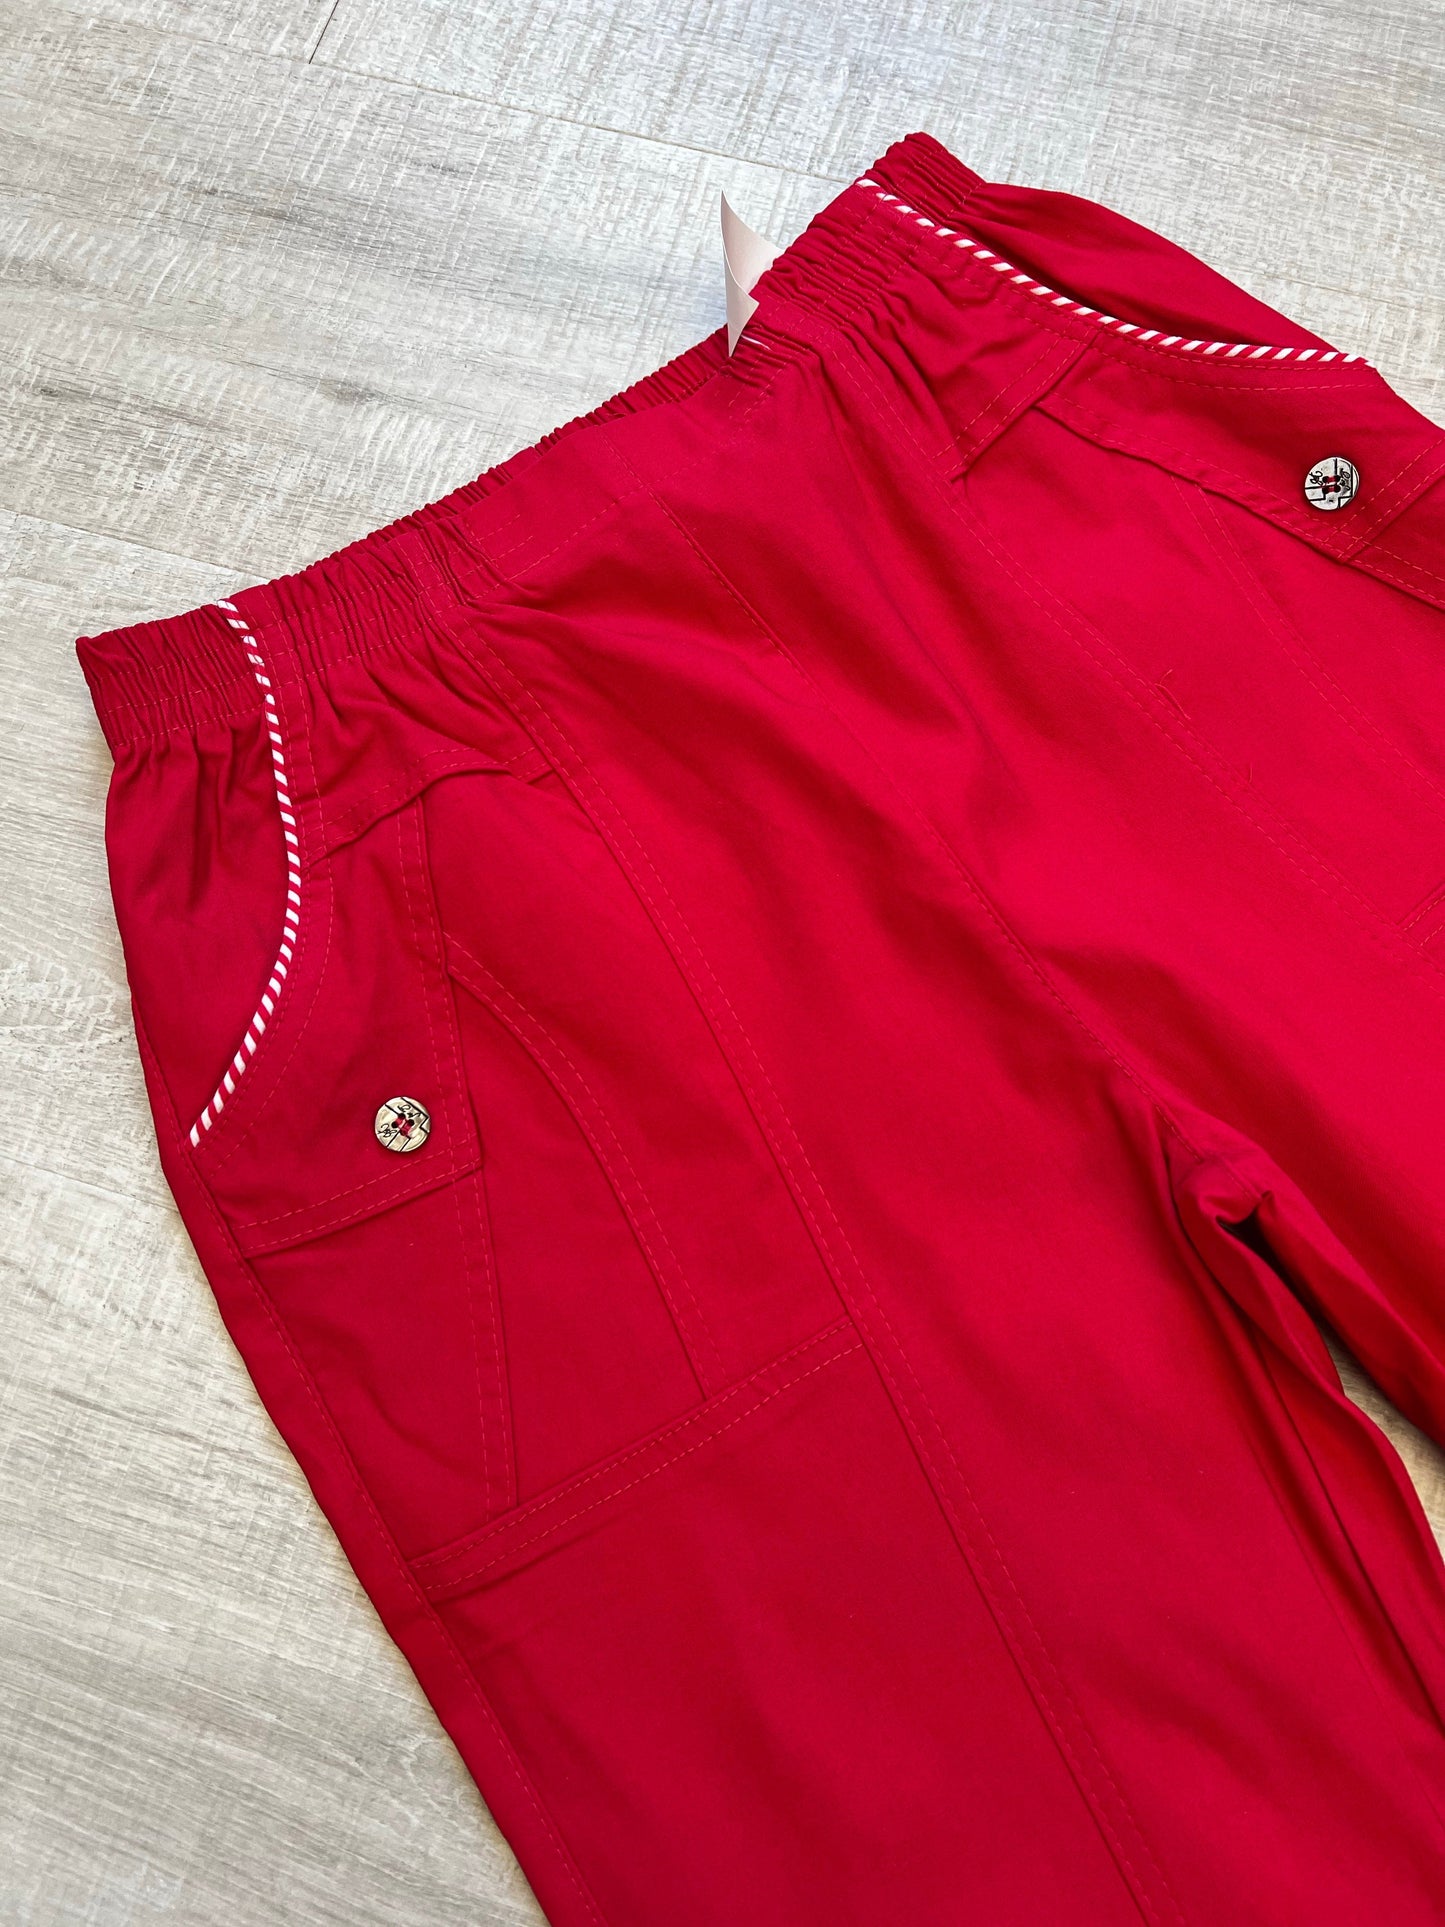 Red striped hem stretchy cropped trousers 10-26